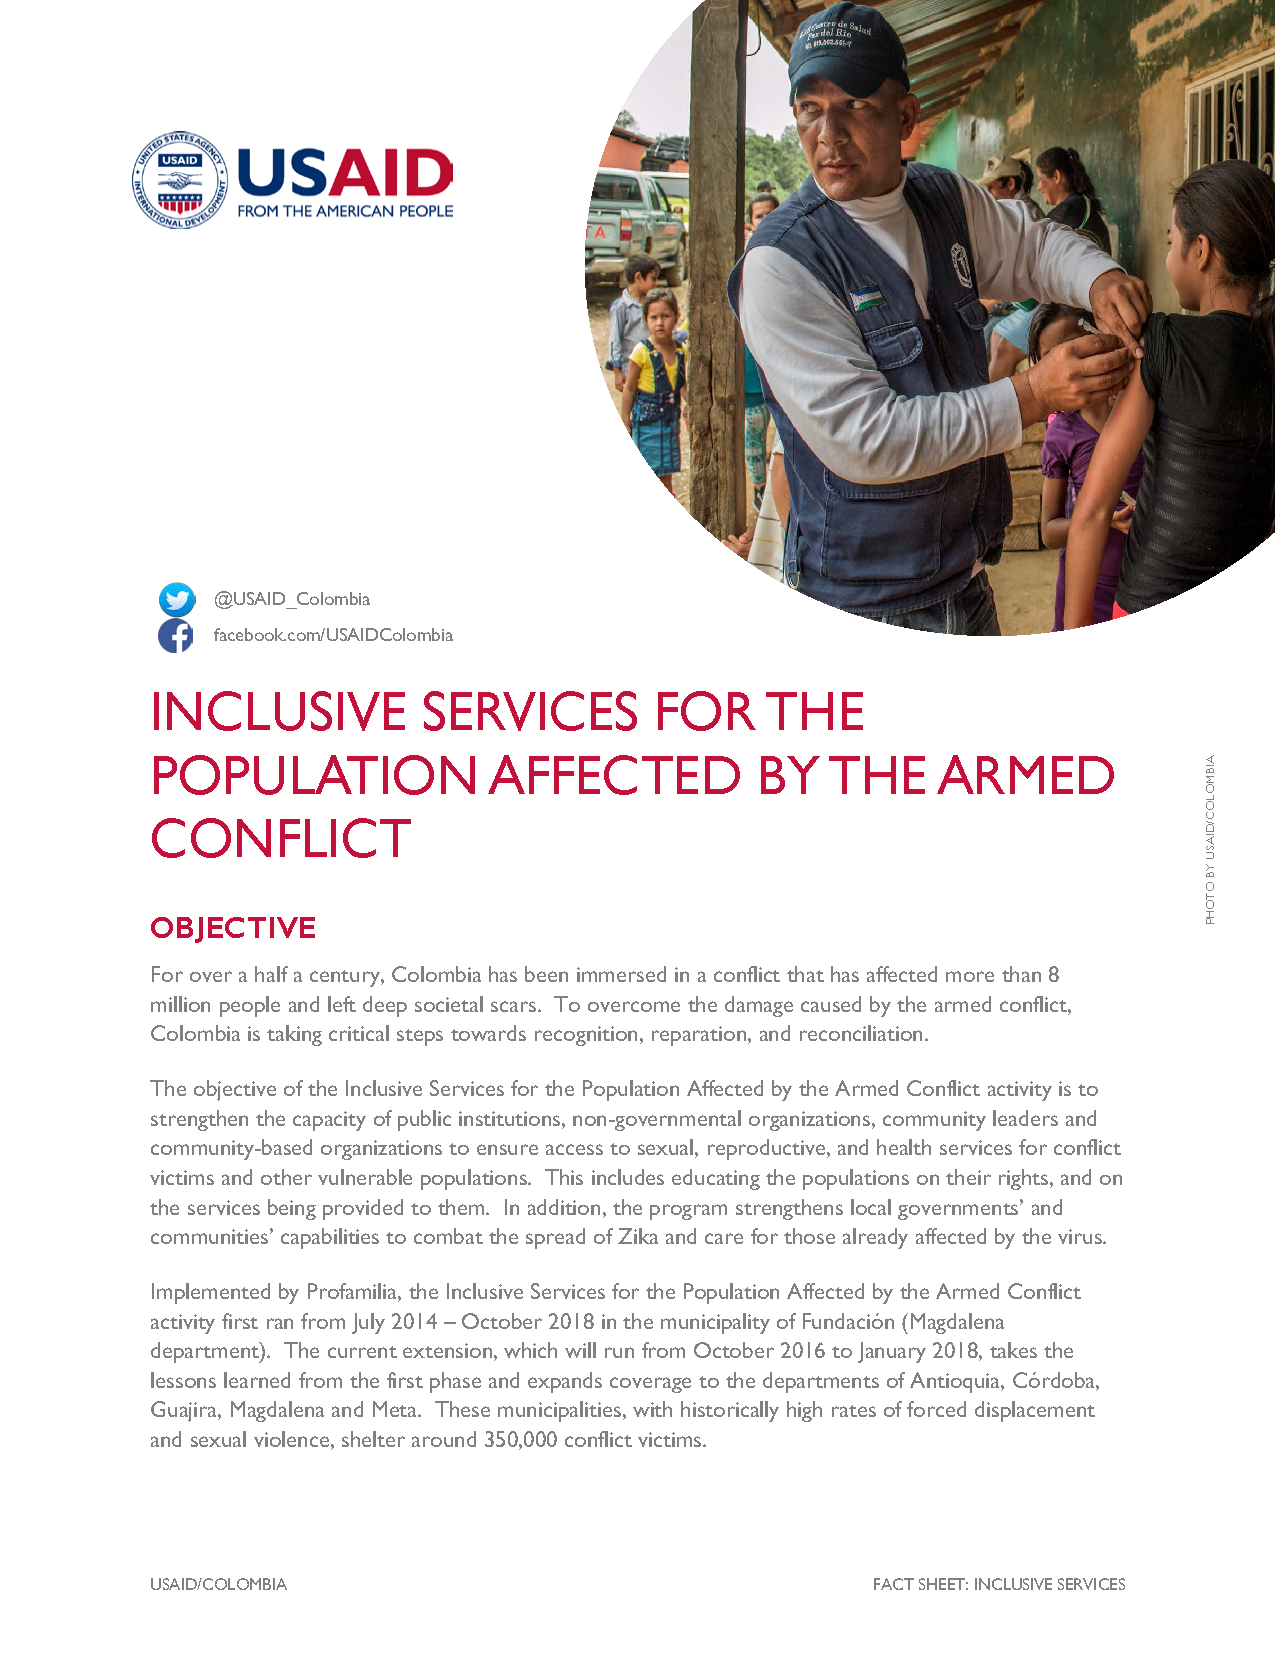 Inclusive Services for the Population Affected by the Armed Conflict Fact Sheet